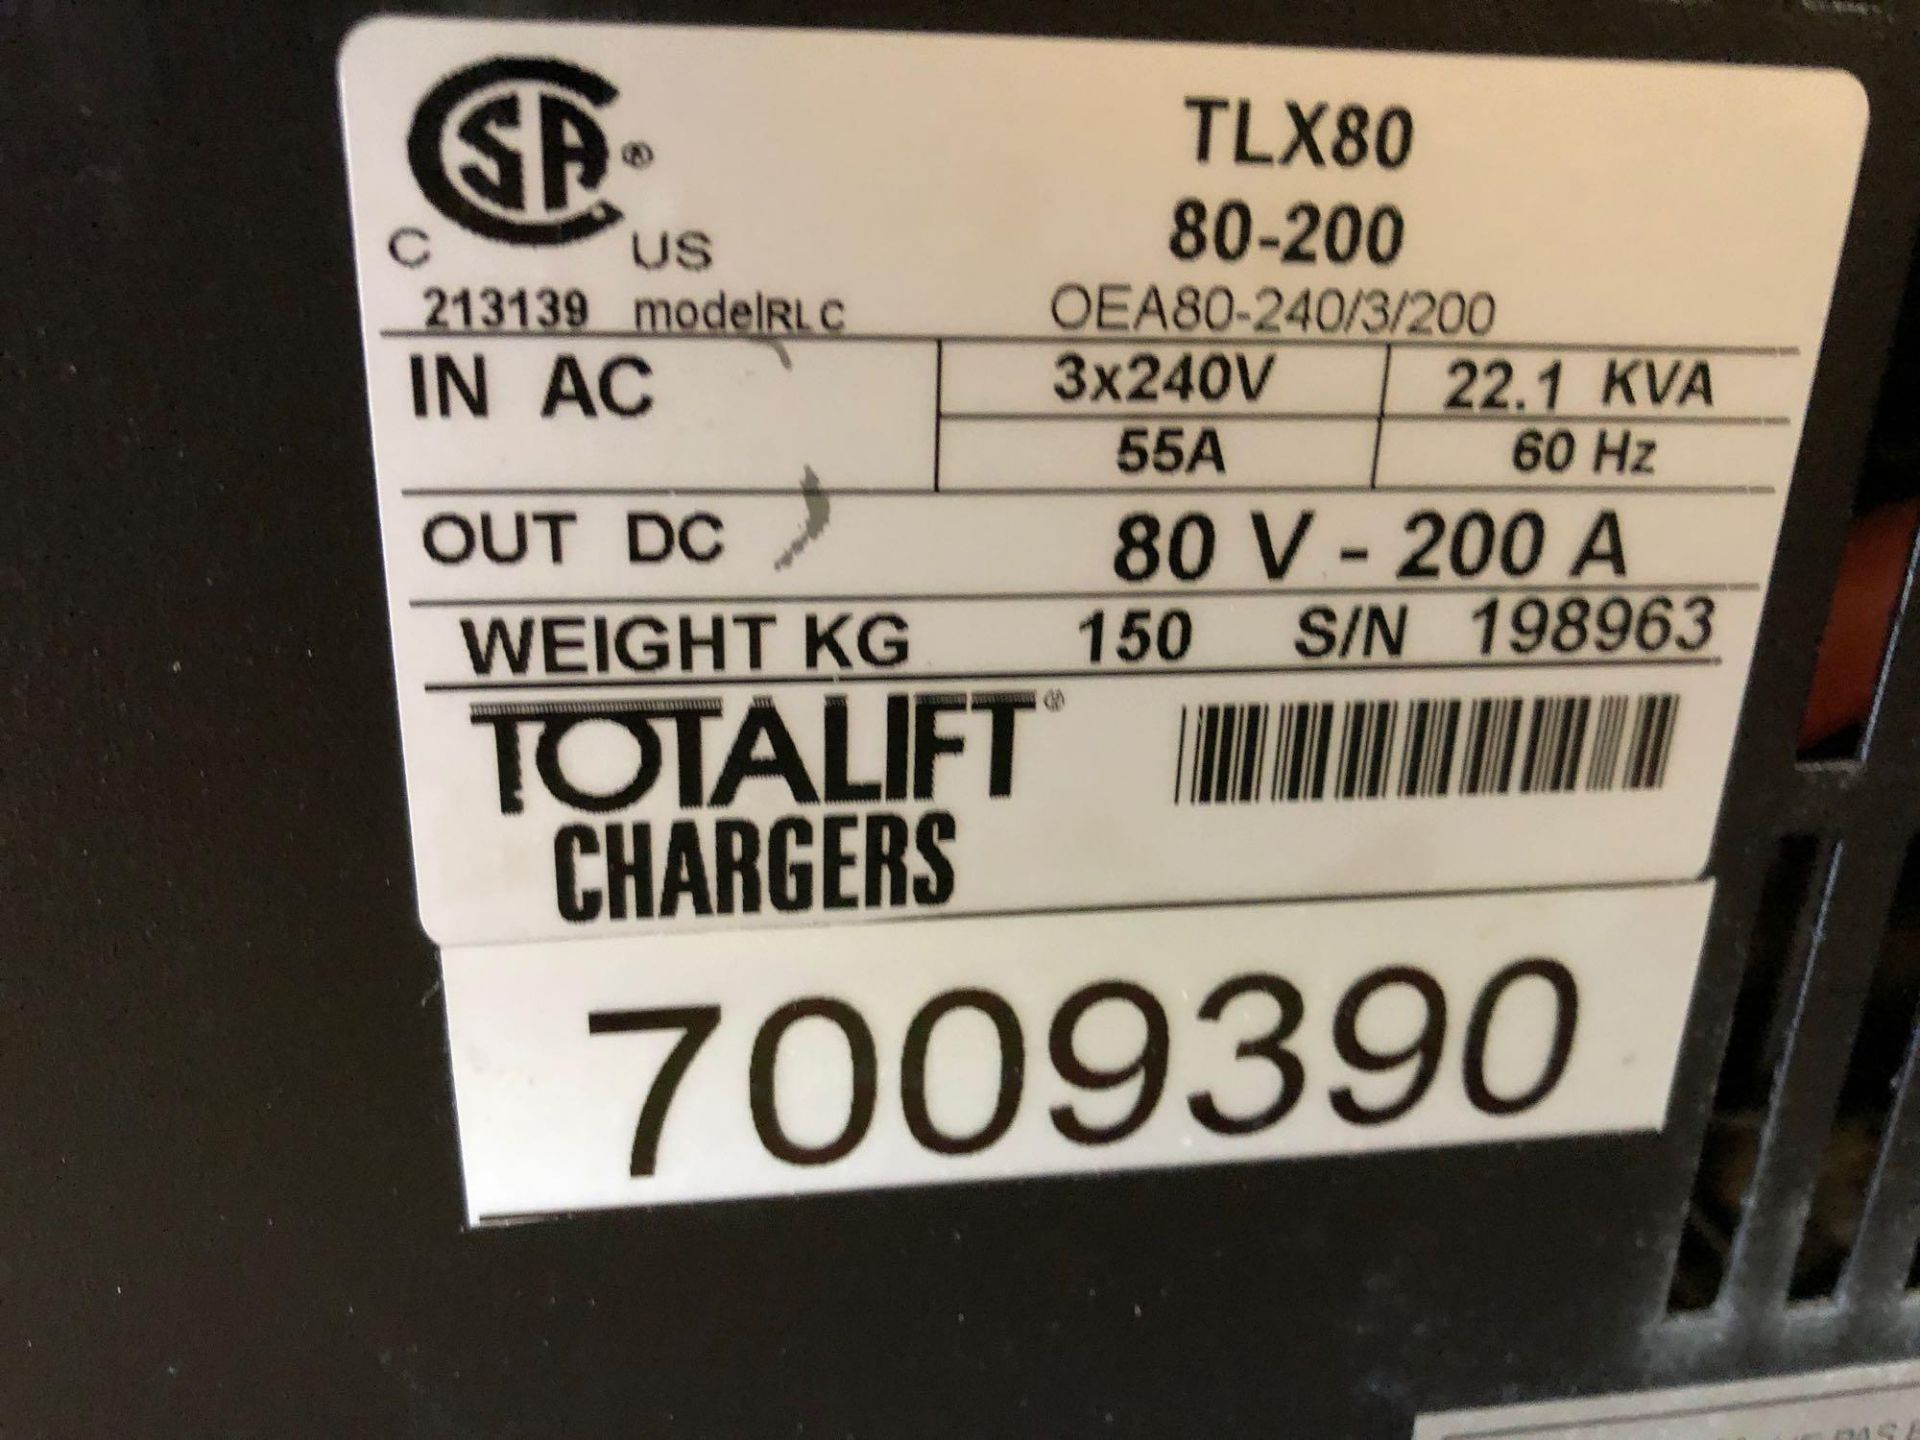 NEW TOTALIFT 80V BATTERY CHARGER - Image 3 of 3